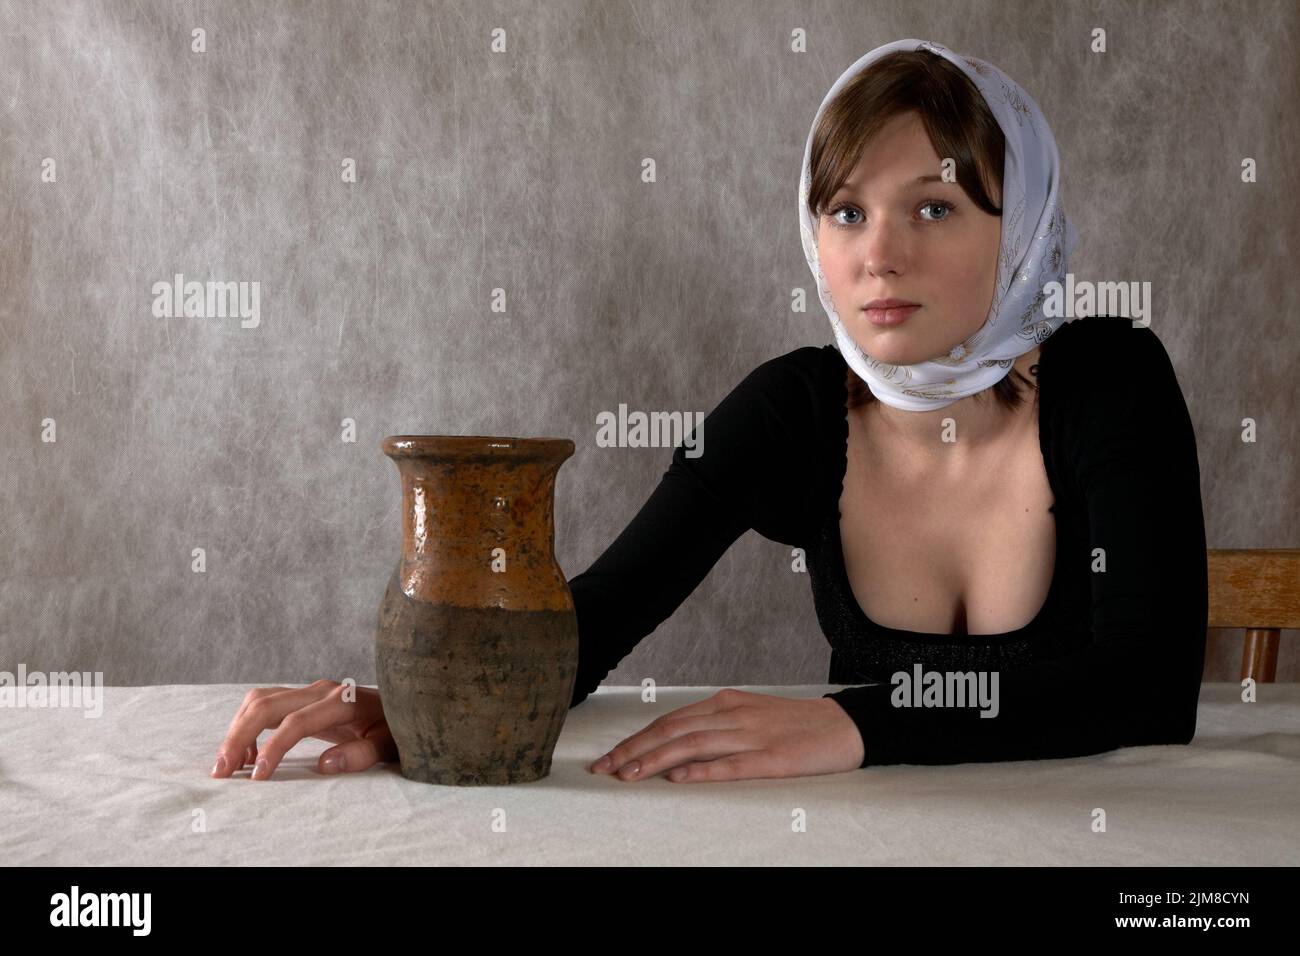 Portrait of the girl in a kerchief Stock Photo